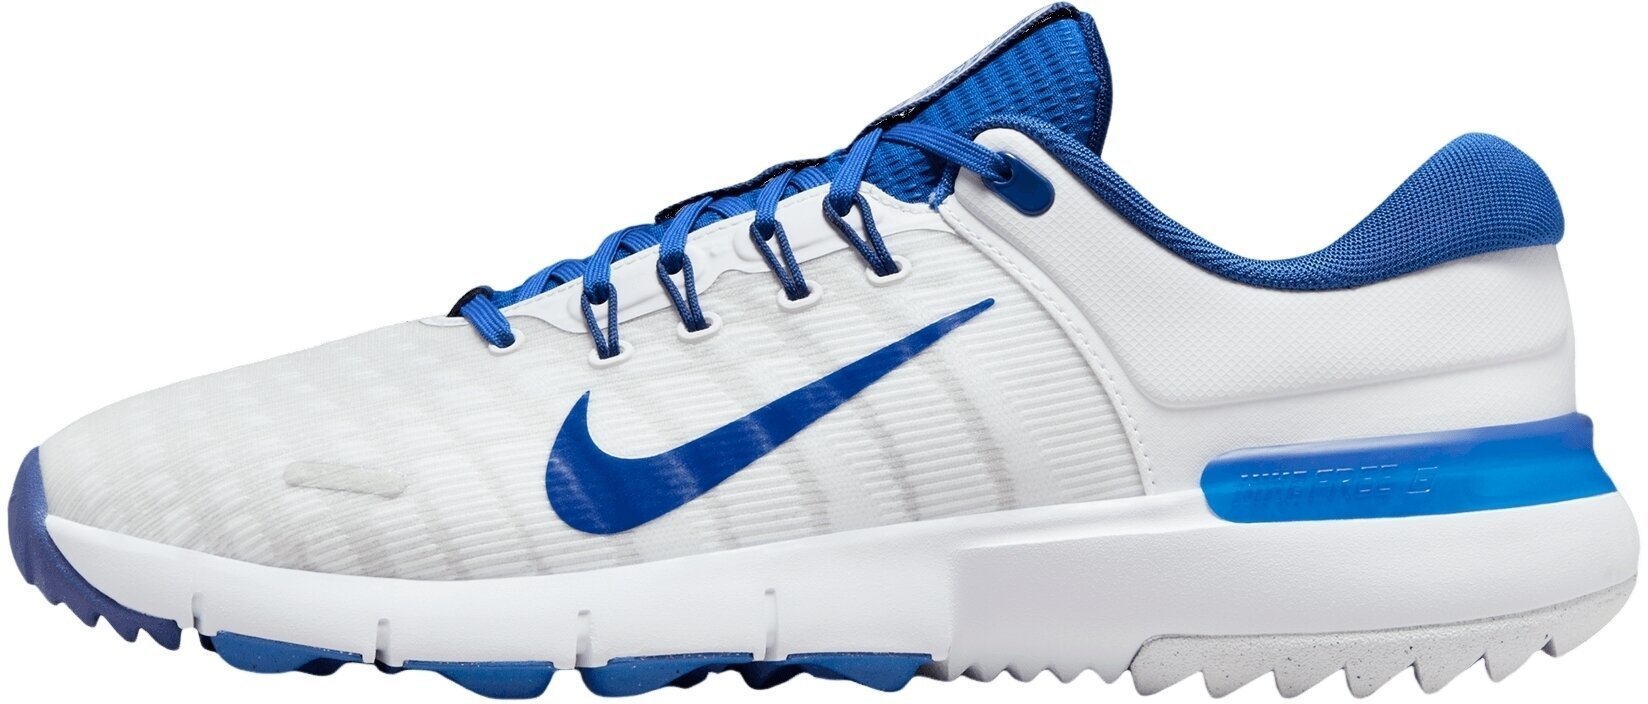 Chaussures de golf pour hommes Nike Free Golf Unisex Shoes Game Royal/Deep Royal Blue/Football Grey 46